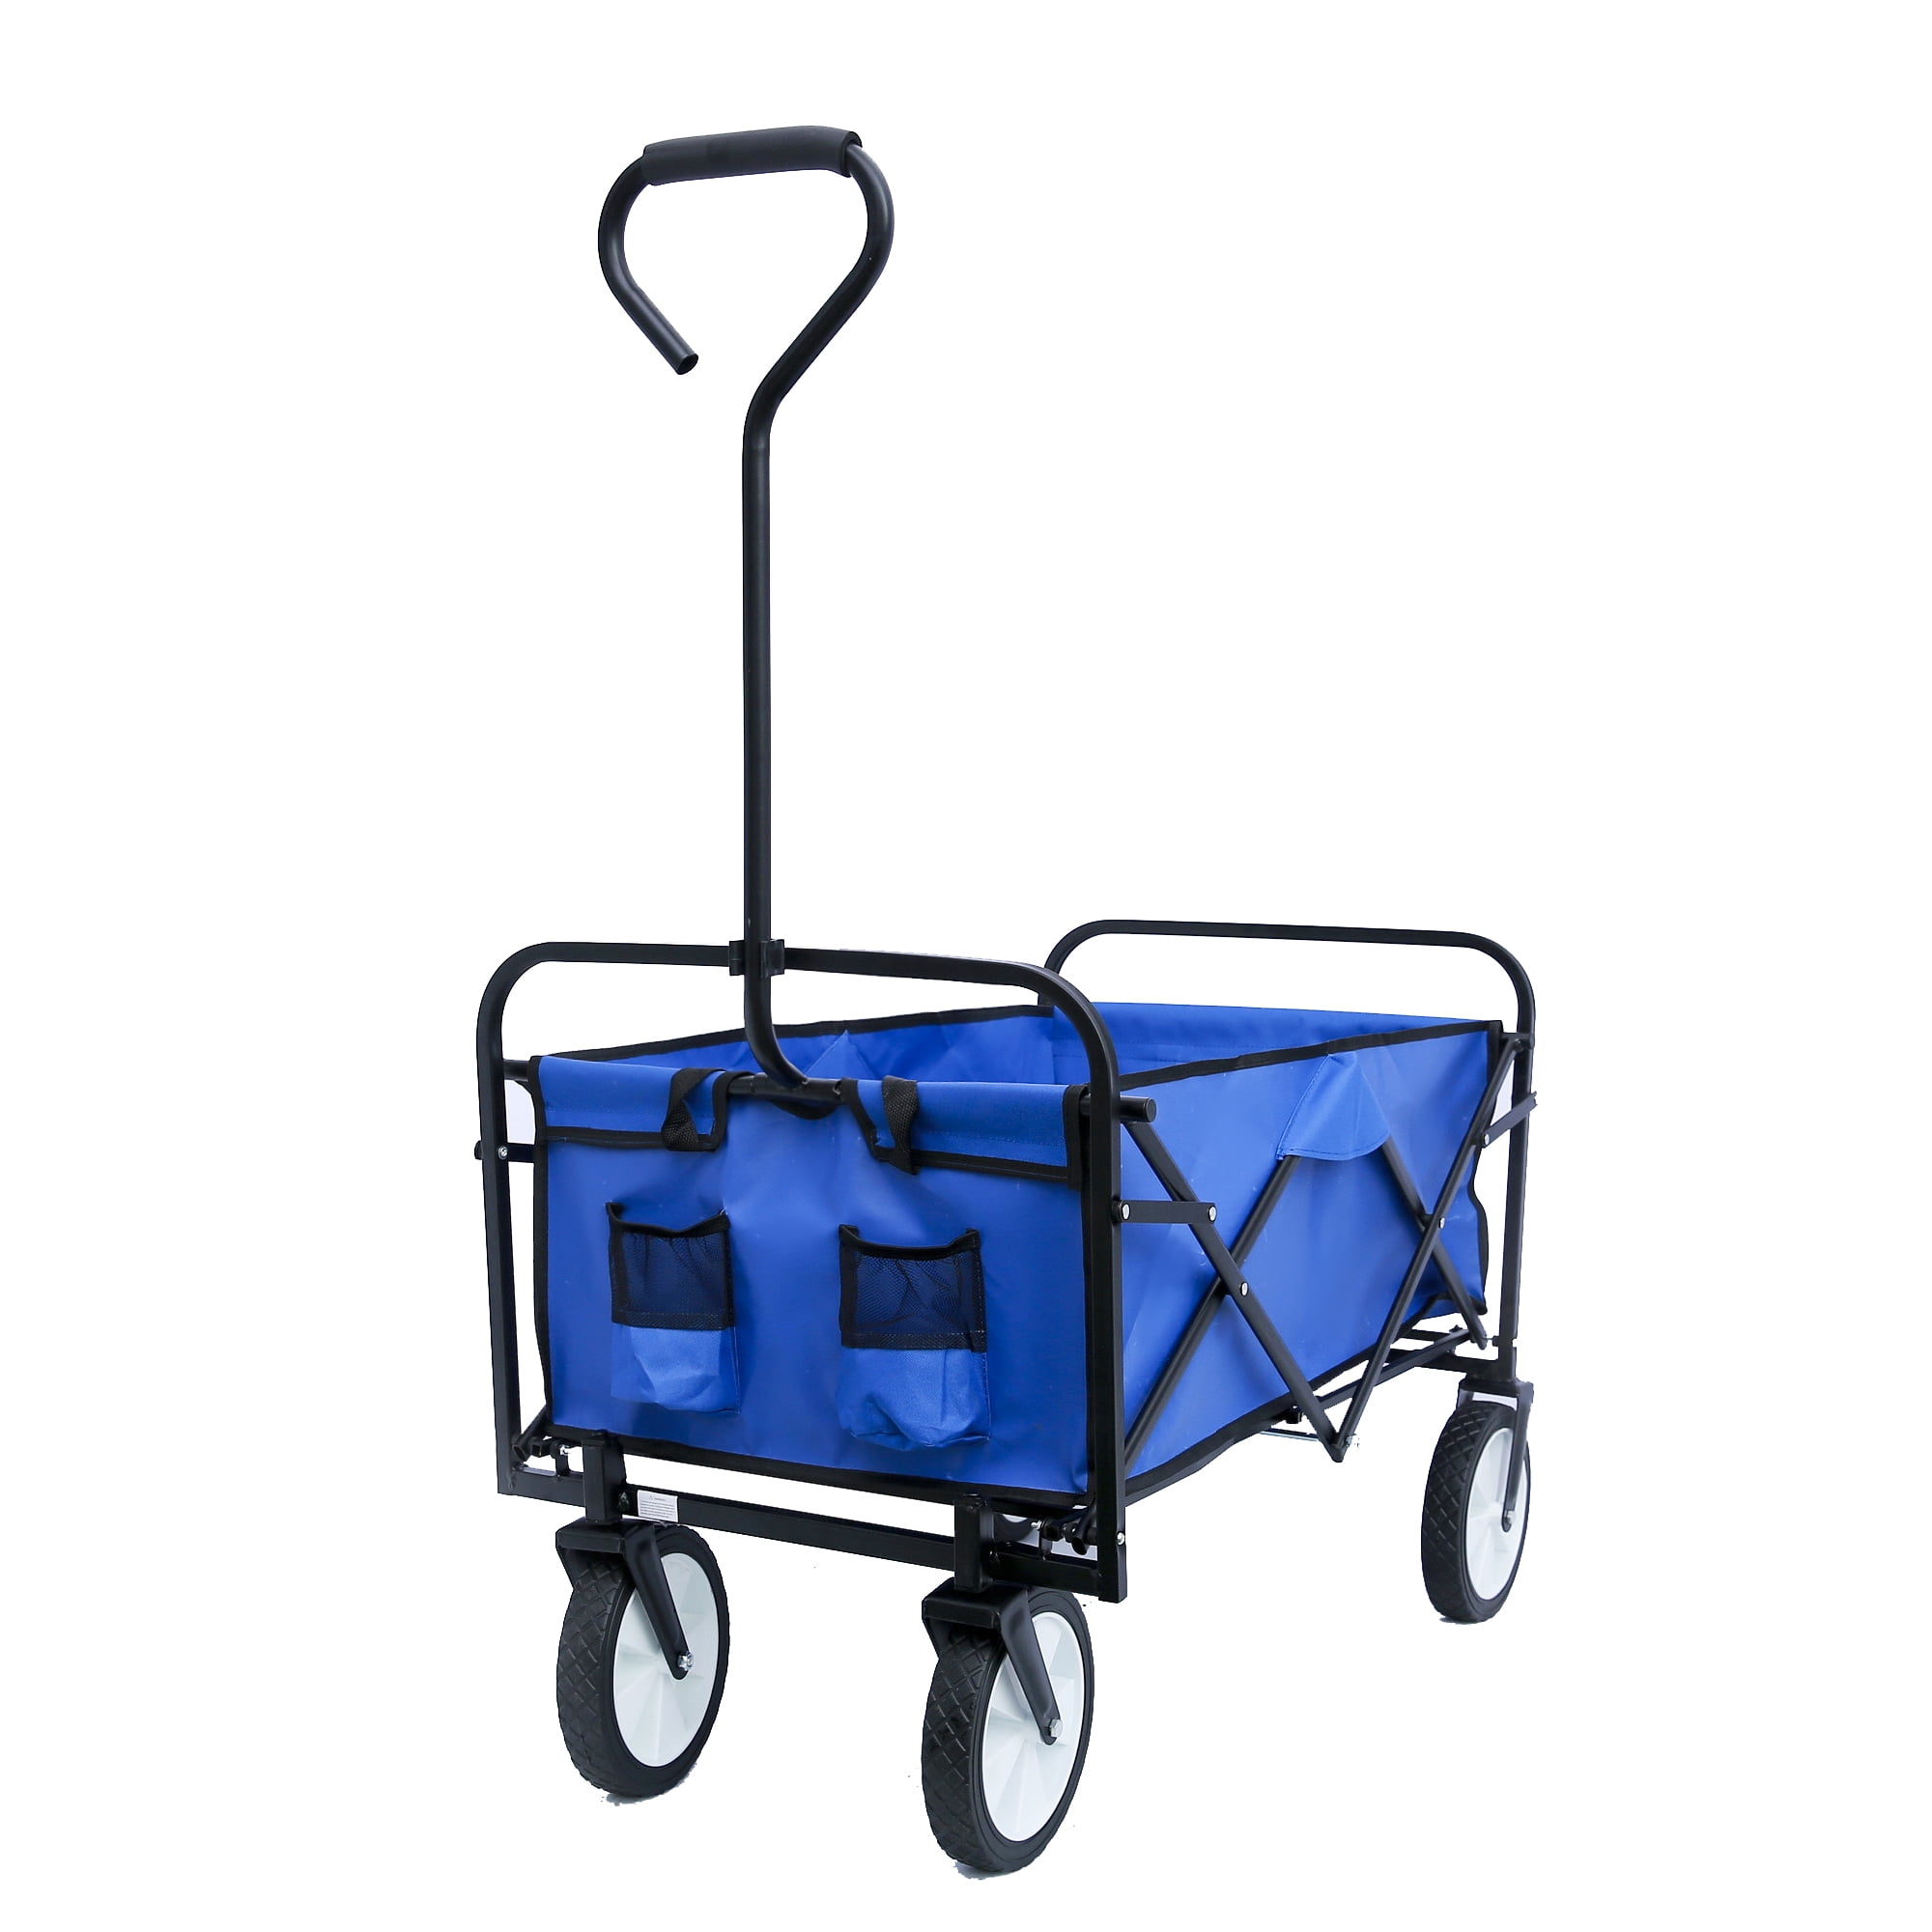 Push and Pull Beach Wagon with Big Wide Rubber Wheels Blue All Terrain Heavy Duty Grocery Cart Utility Collapsible Wagon for Outdoor Garden Picnic Beach Sports Camping 